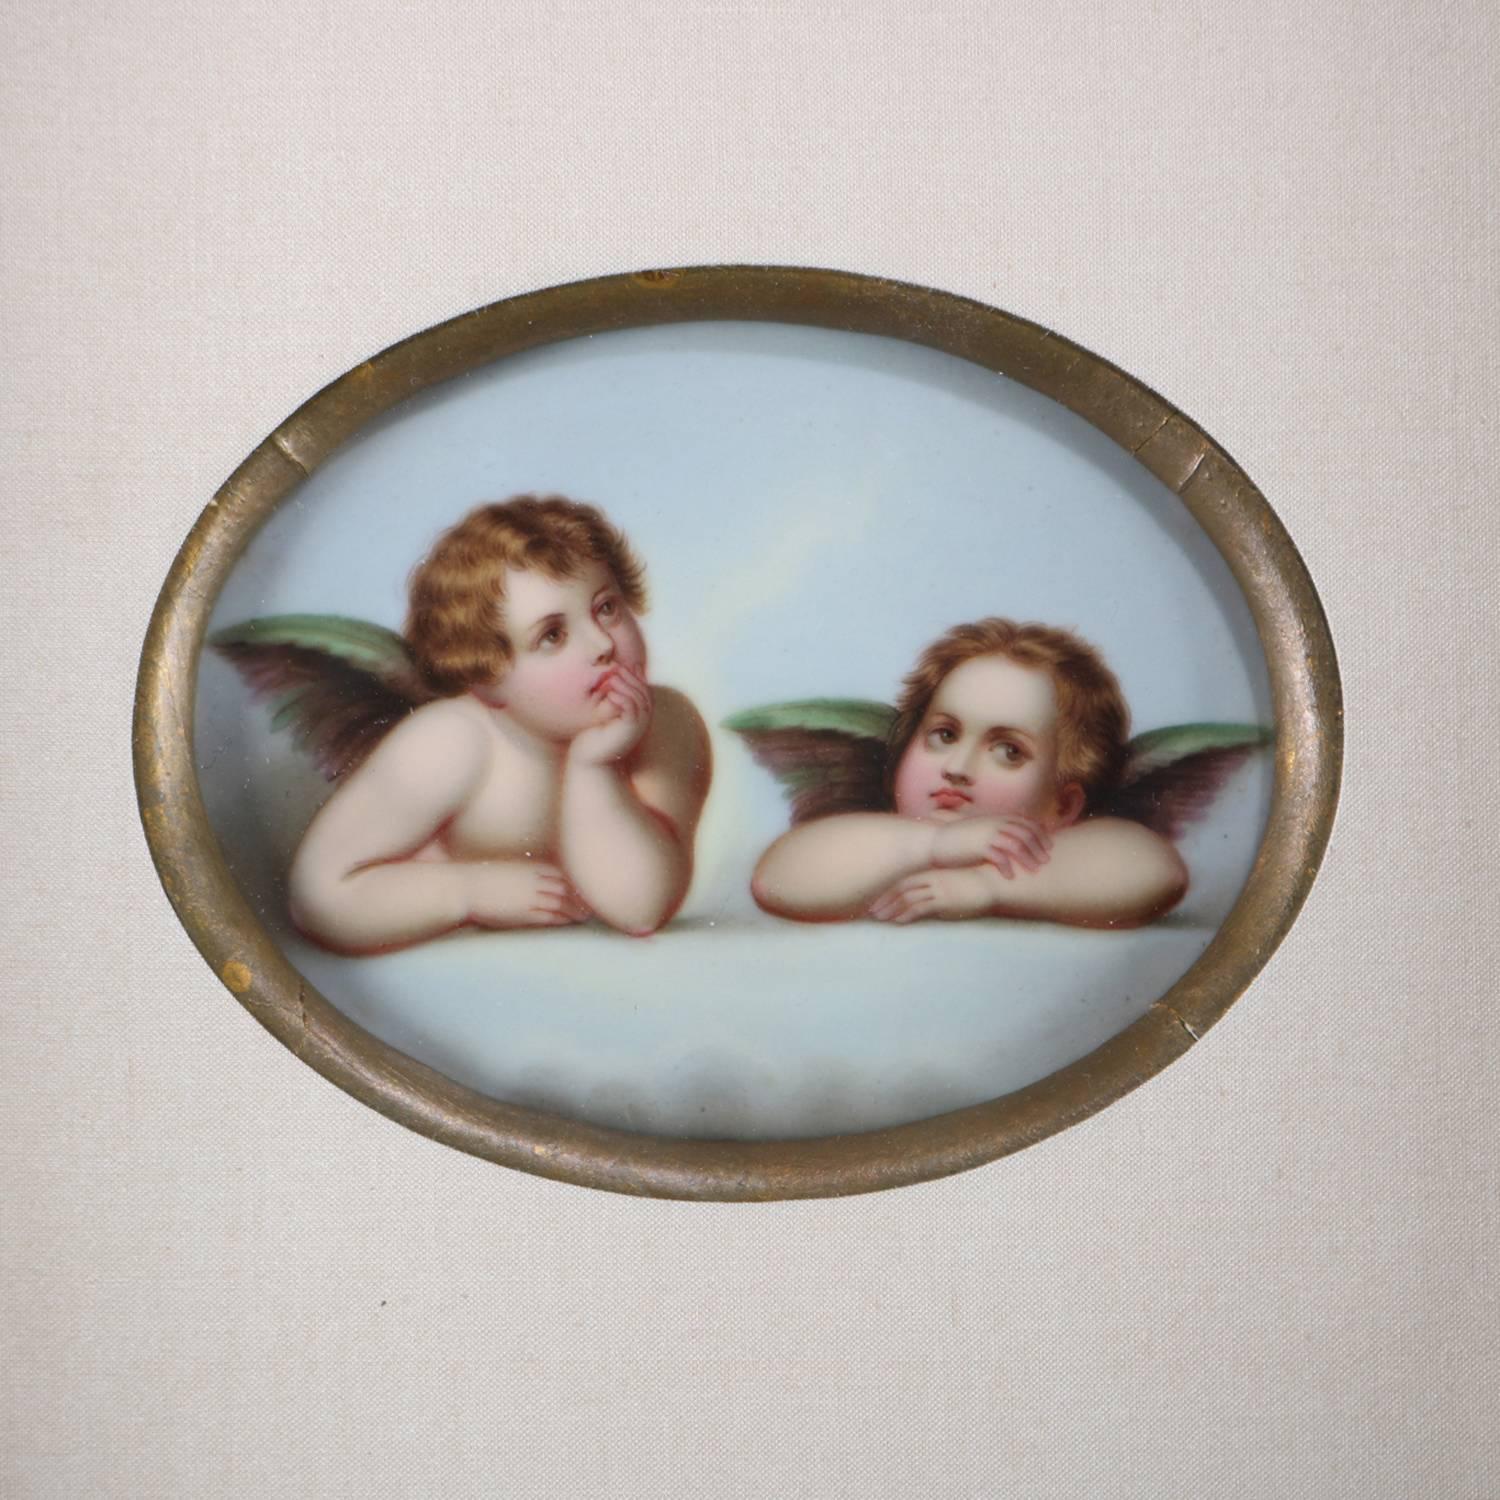 Antique Classical hand-painted porcelain plaque depicts two cherubs, en verso mark as photographed, seated in gilt frame, circa 1870

Measures: frame 10.5